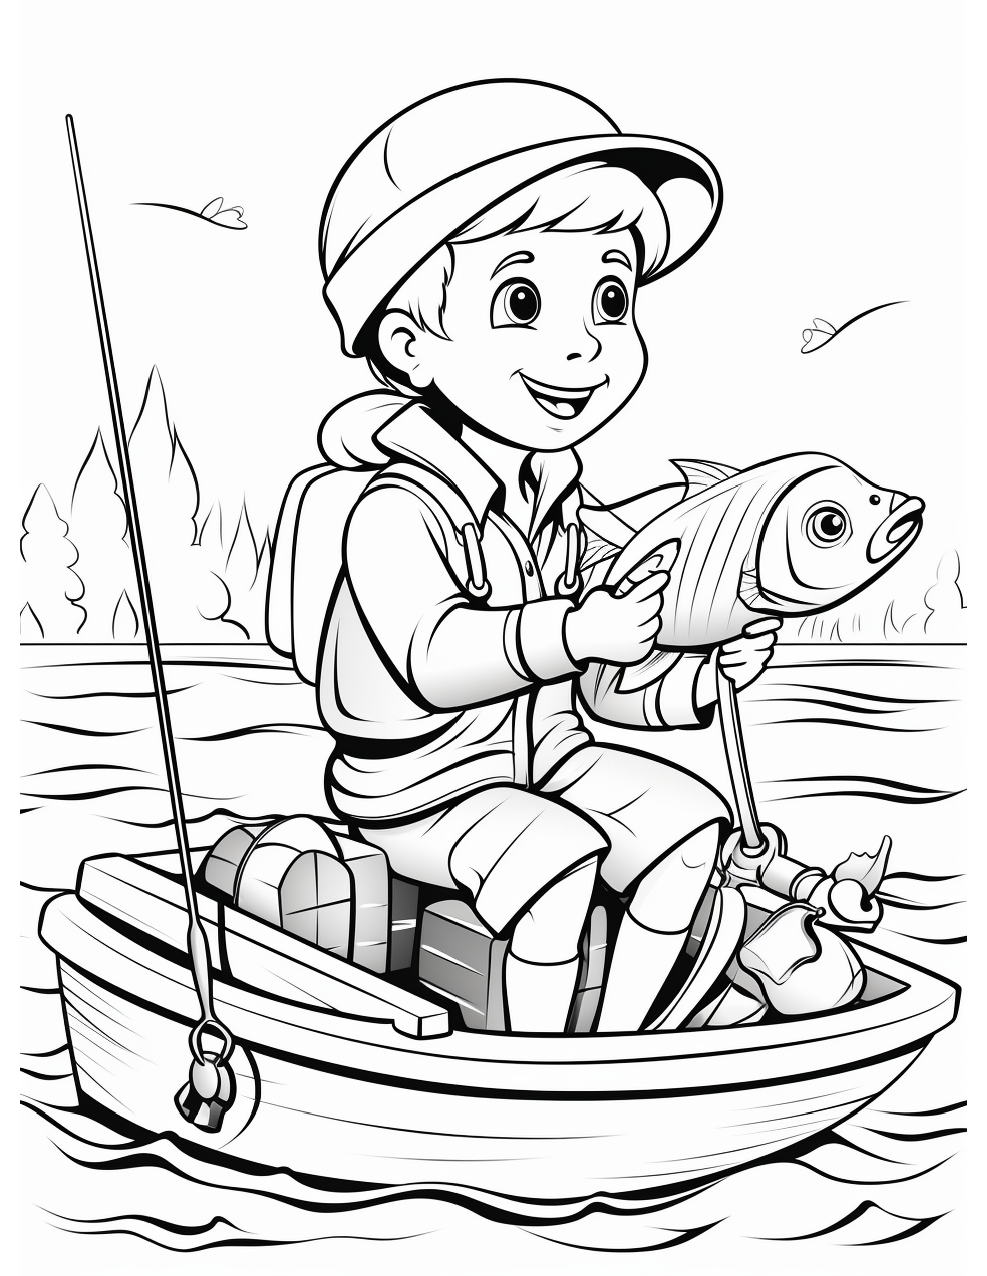 Fishing Coloring Page 5 - Line drawing of a boy holding fish in a boat